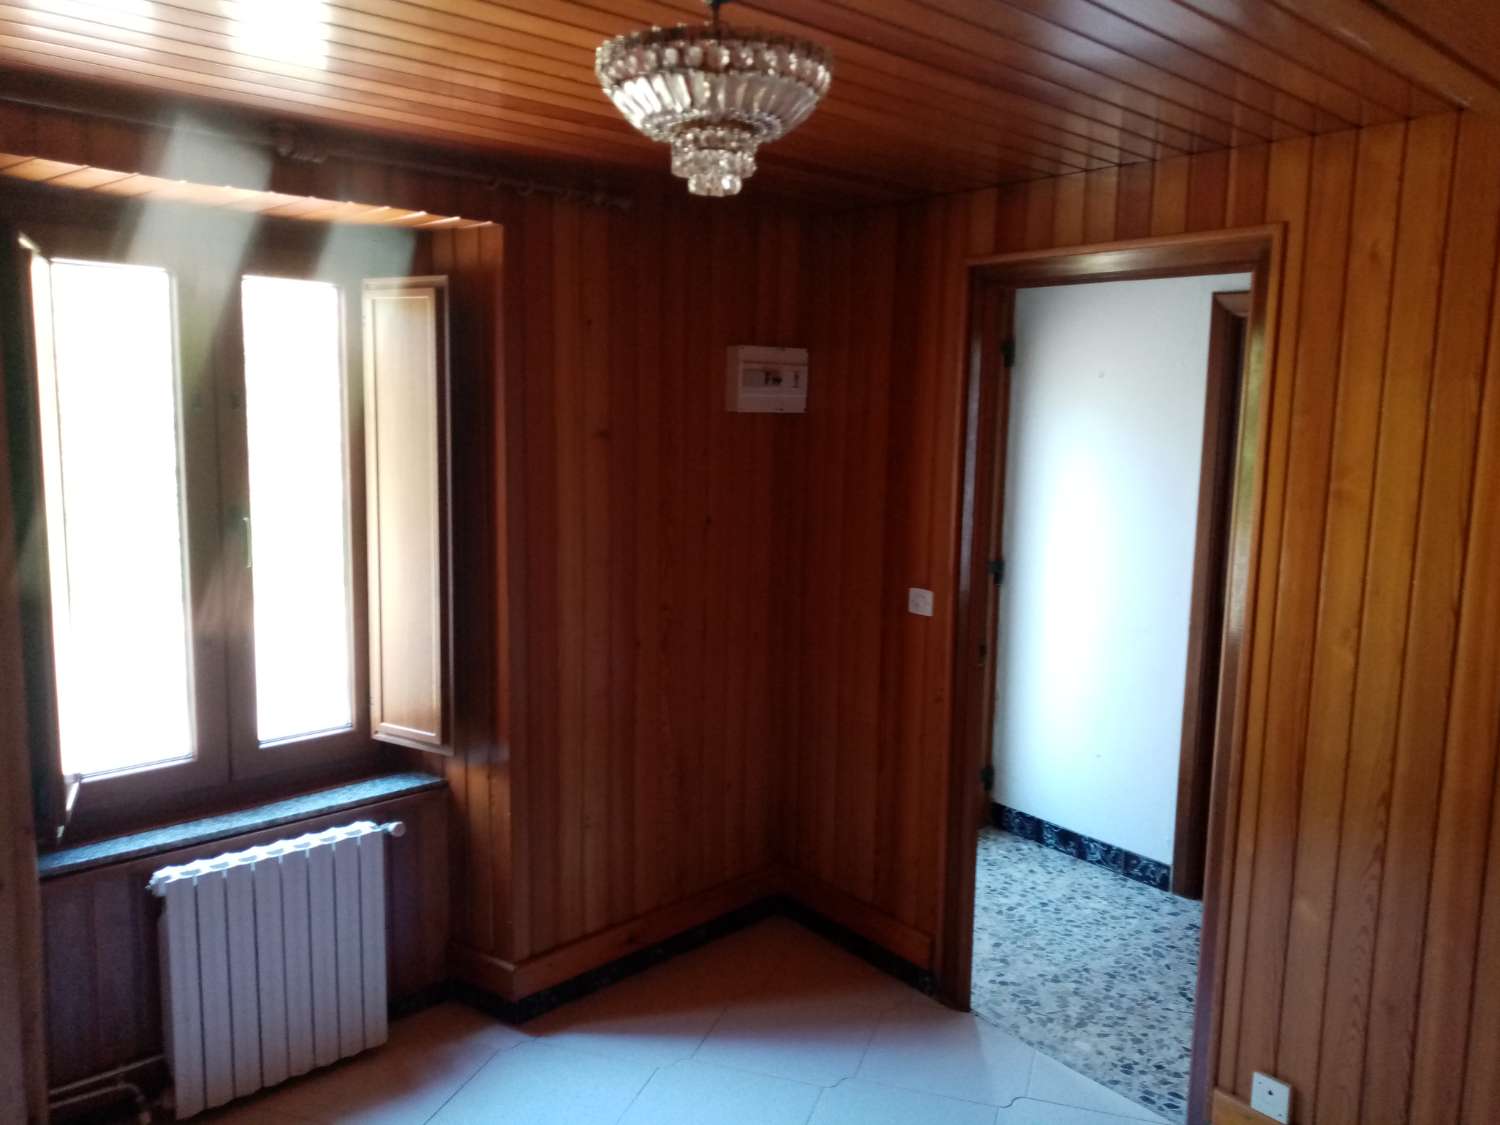 House for sale in Sada